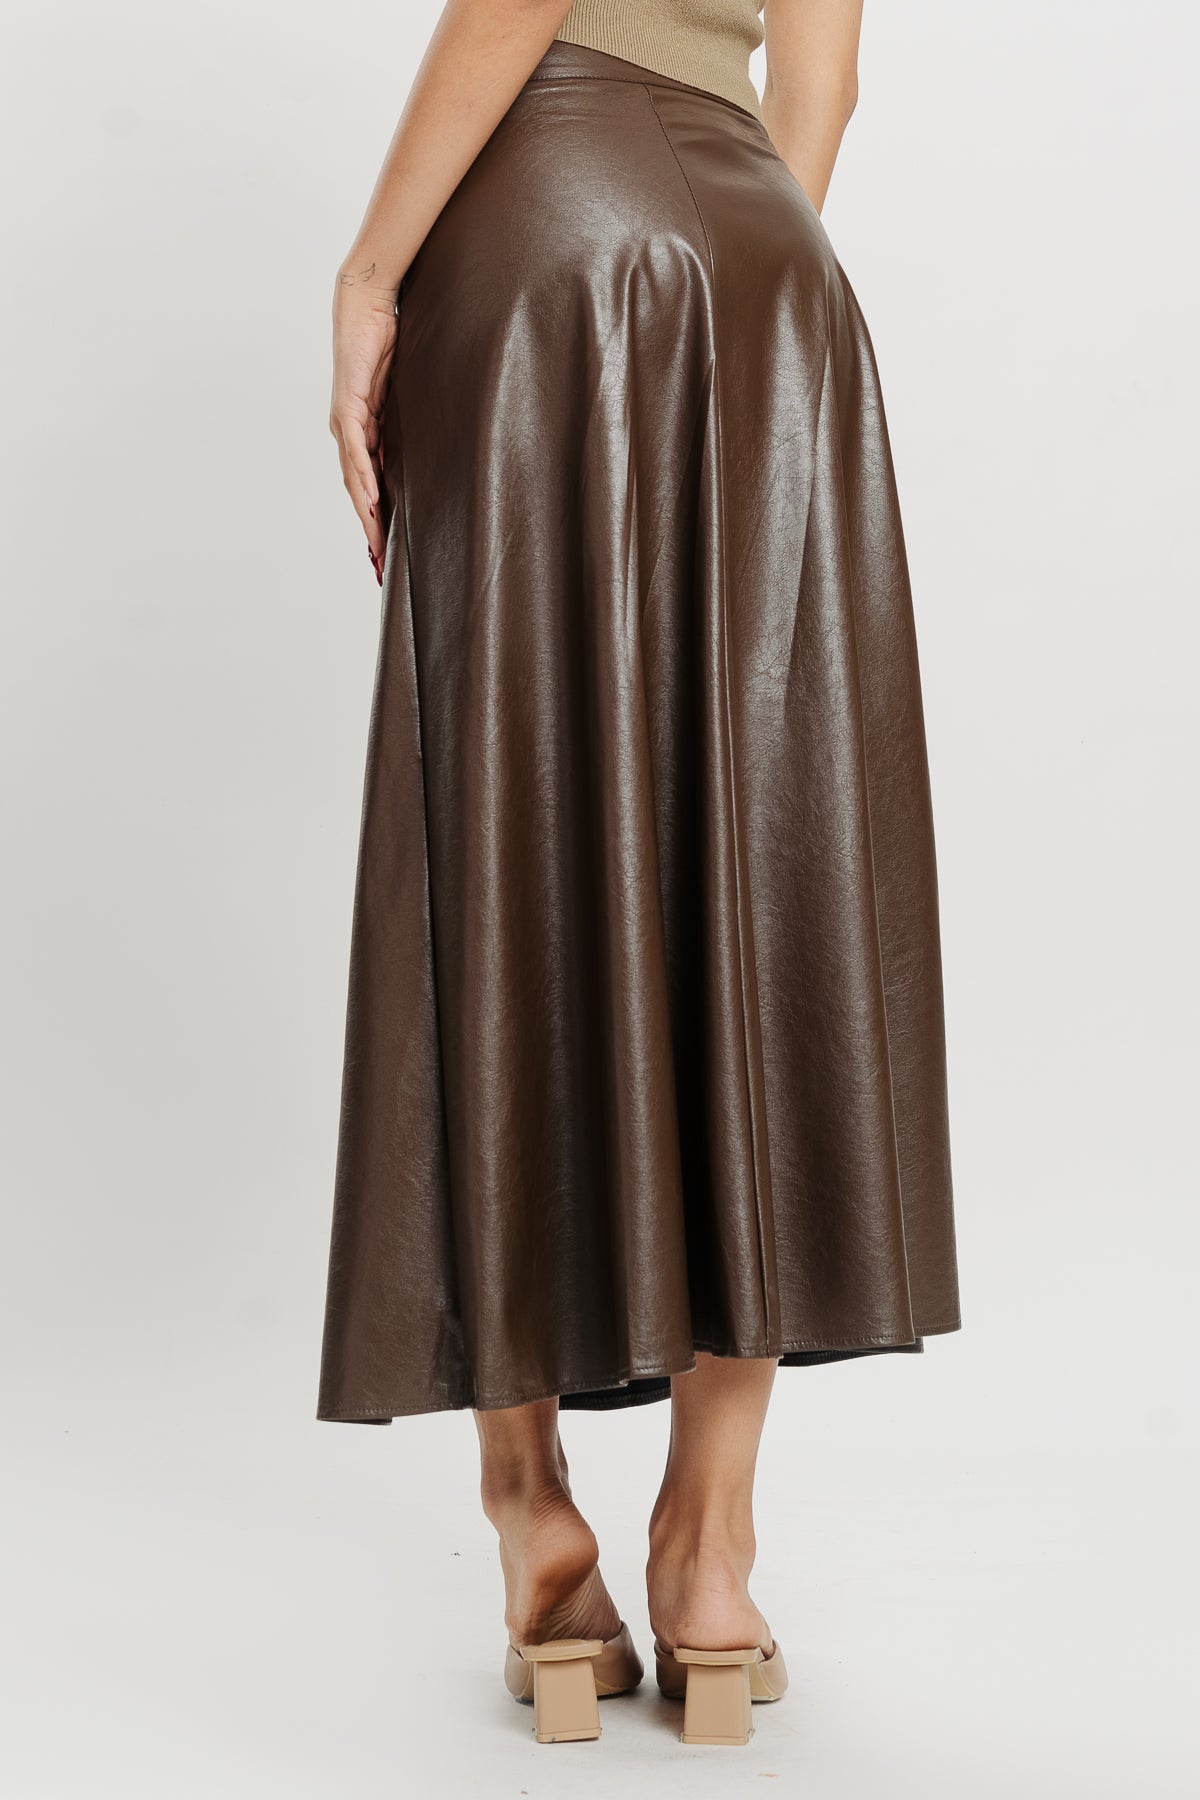 BROWN FLARED LEATHER SKIRT